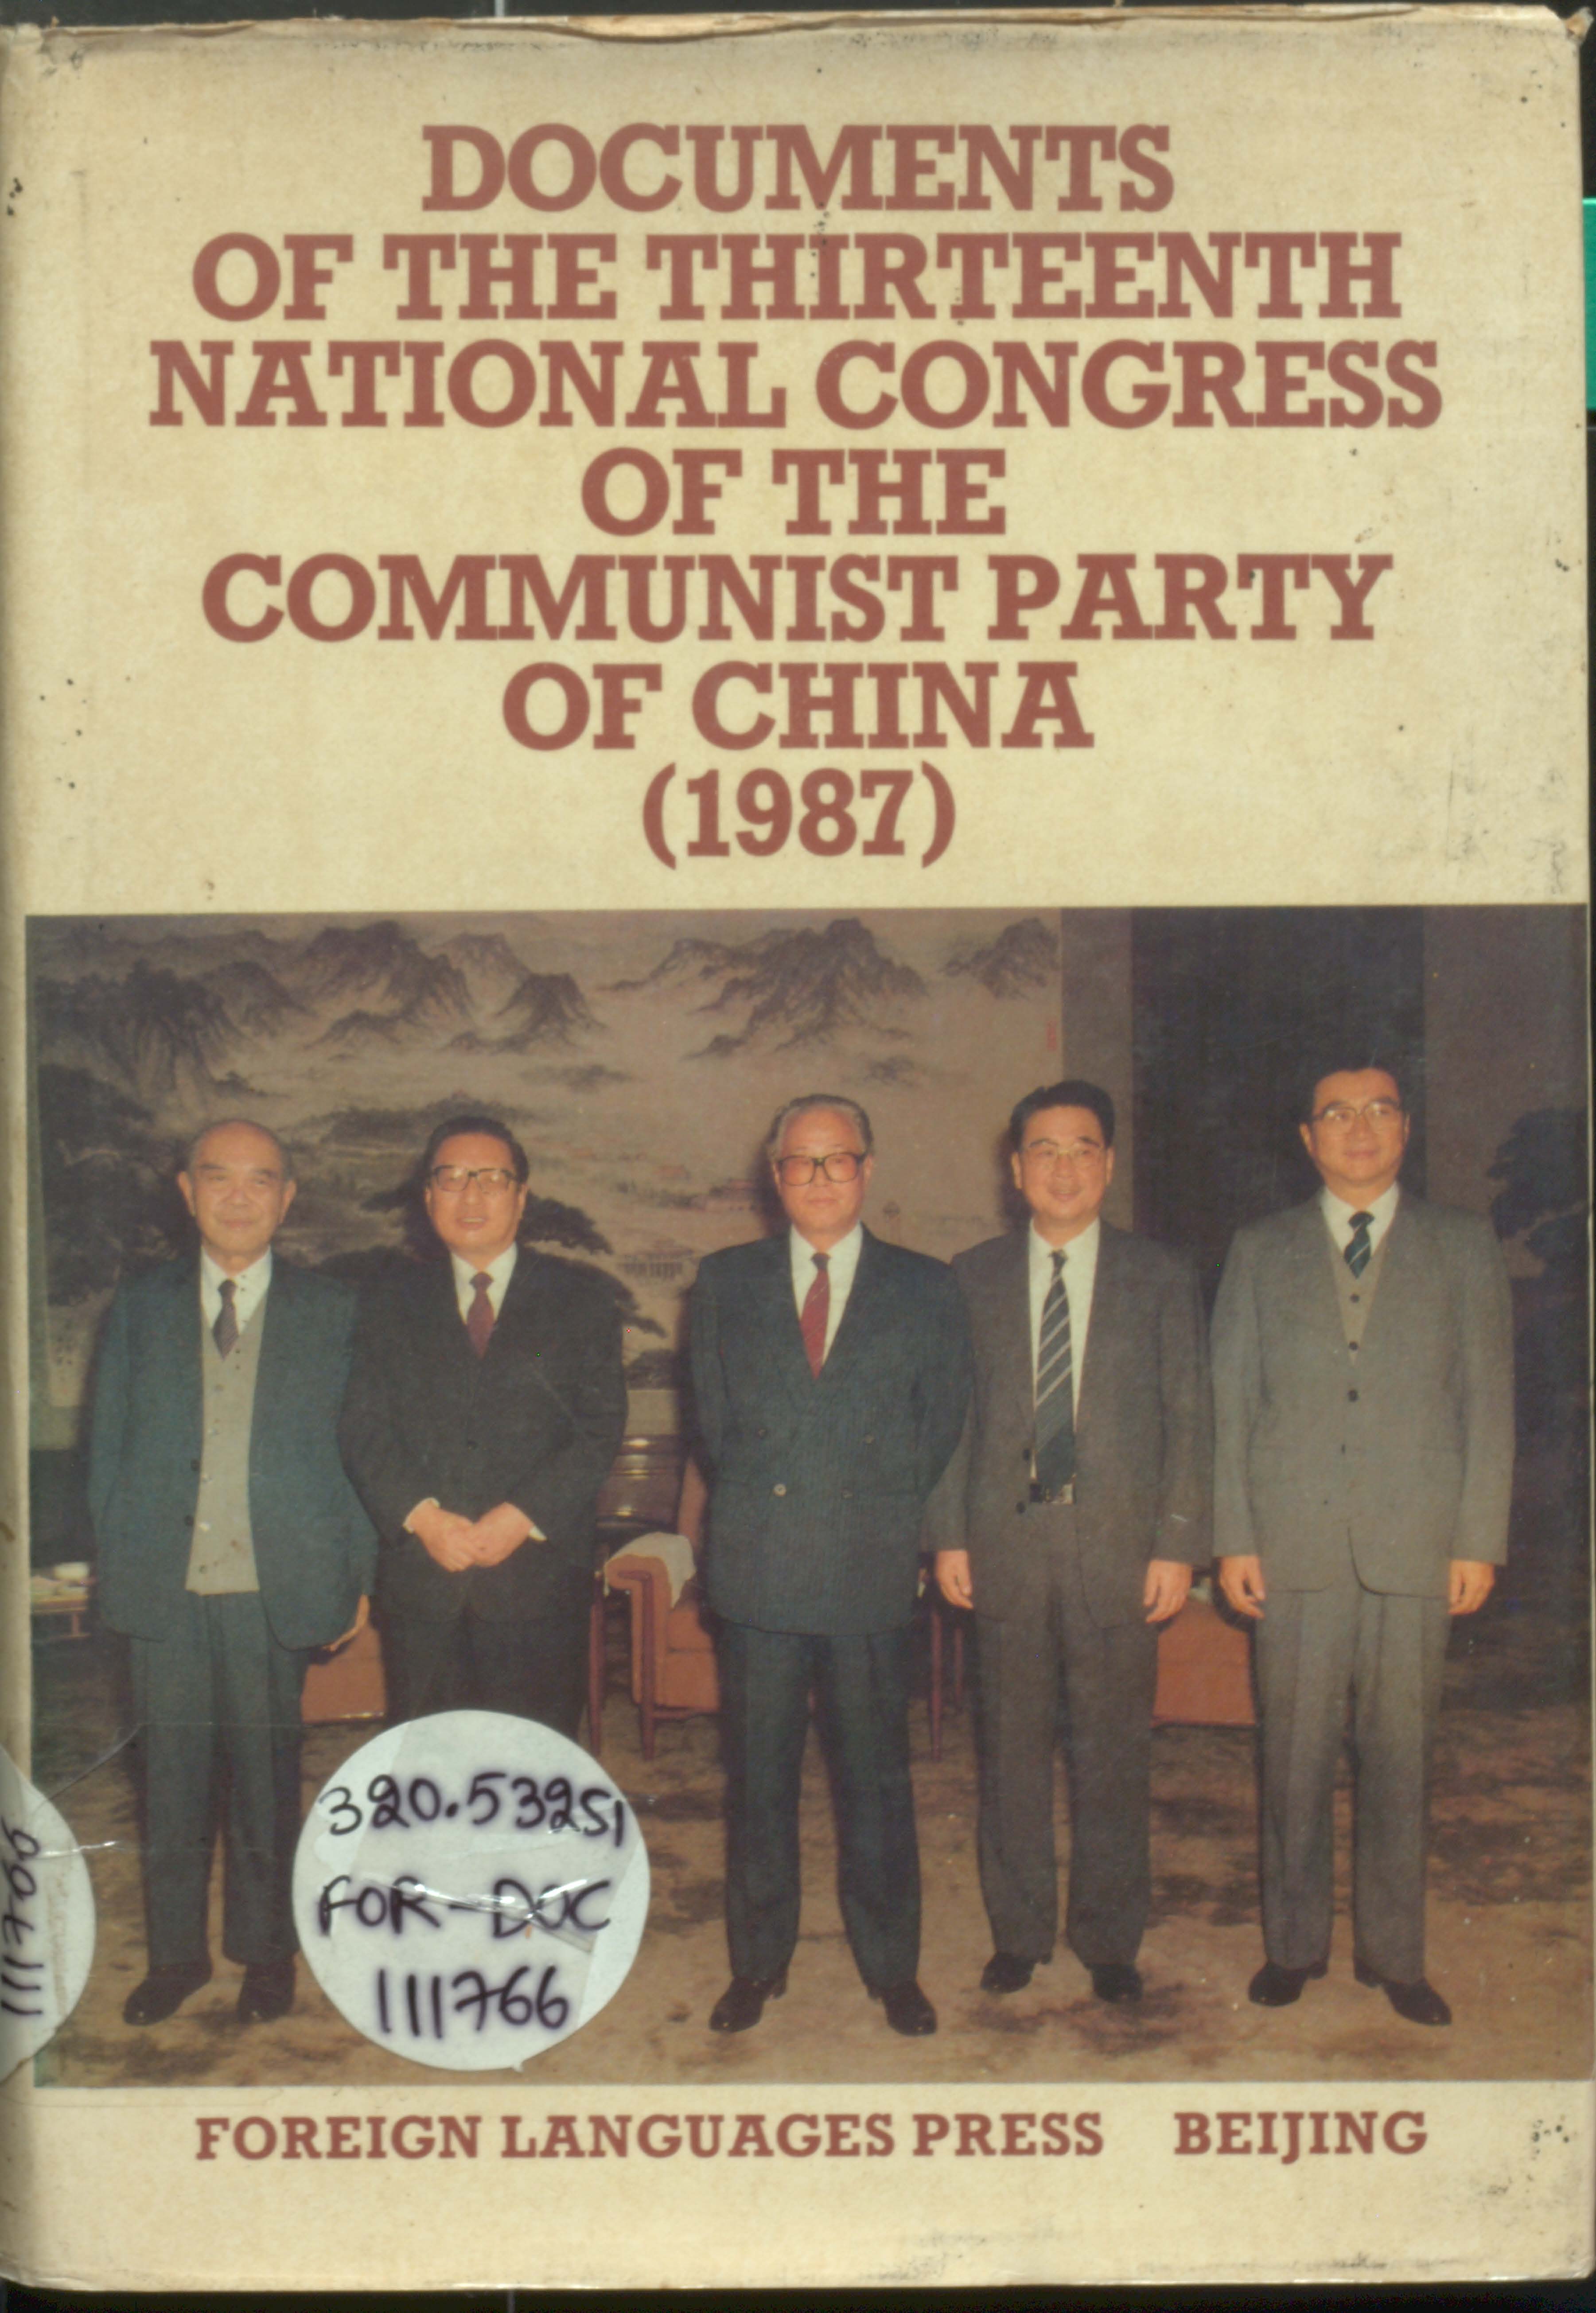 Documents of the thirteenth national congress of the communist party of china (1987)